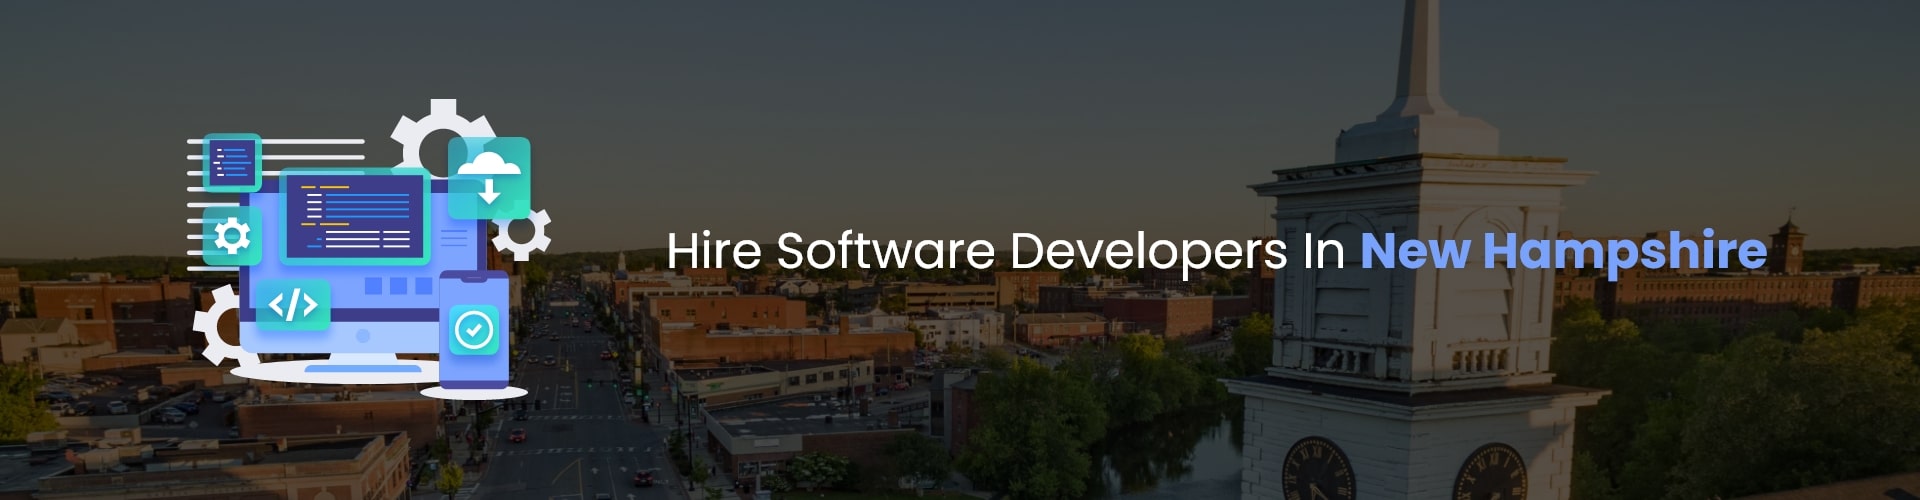 hire software developers in new hampshire